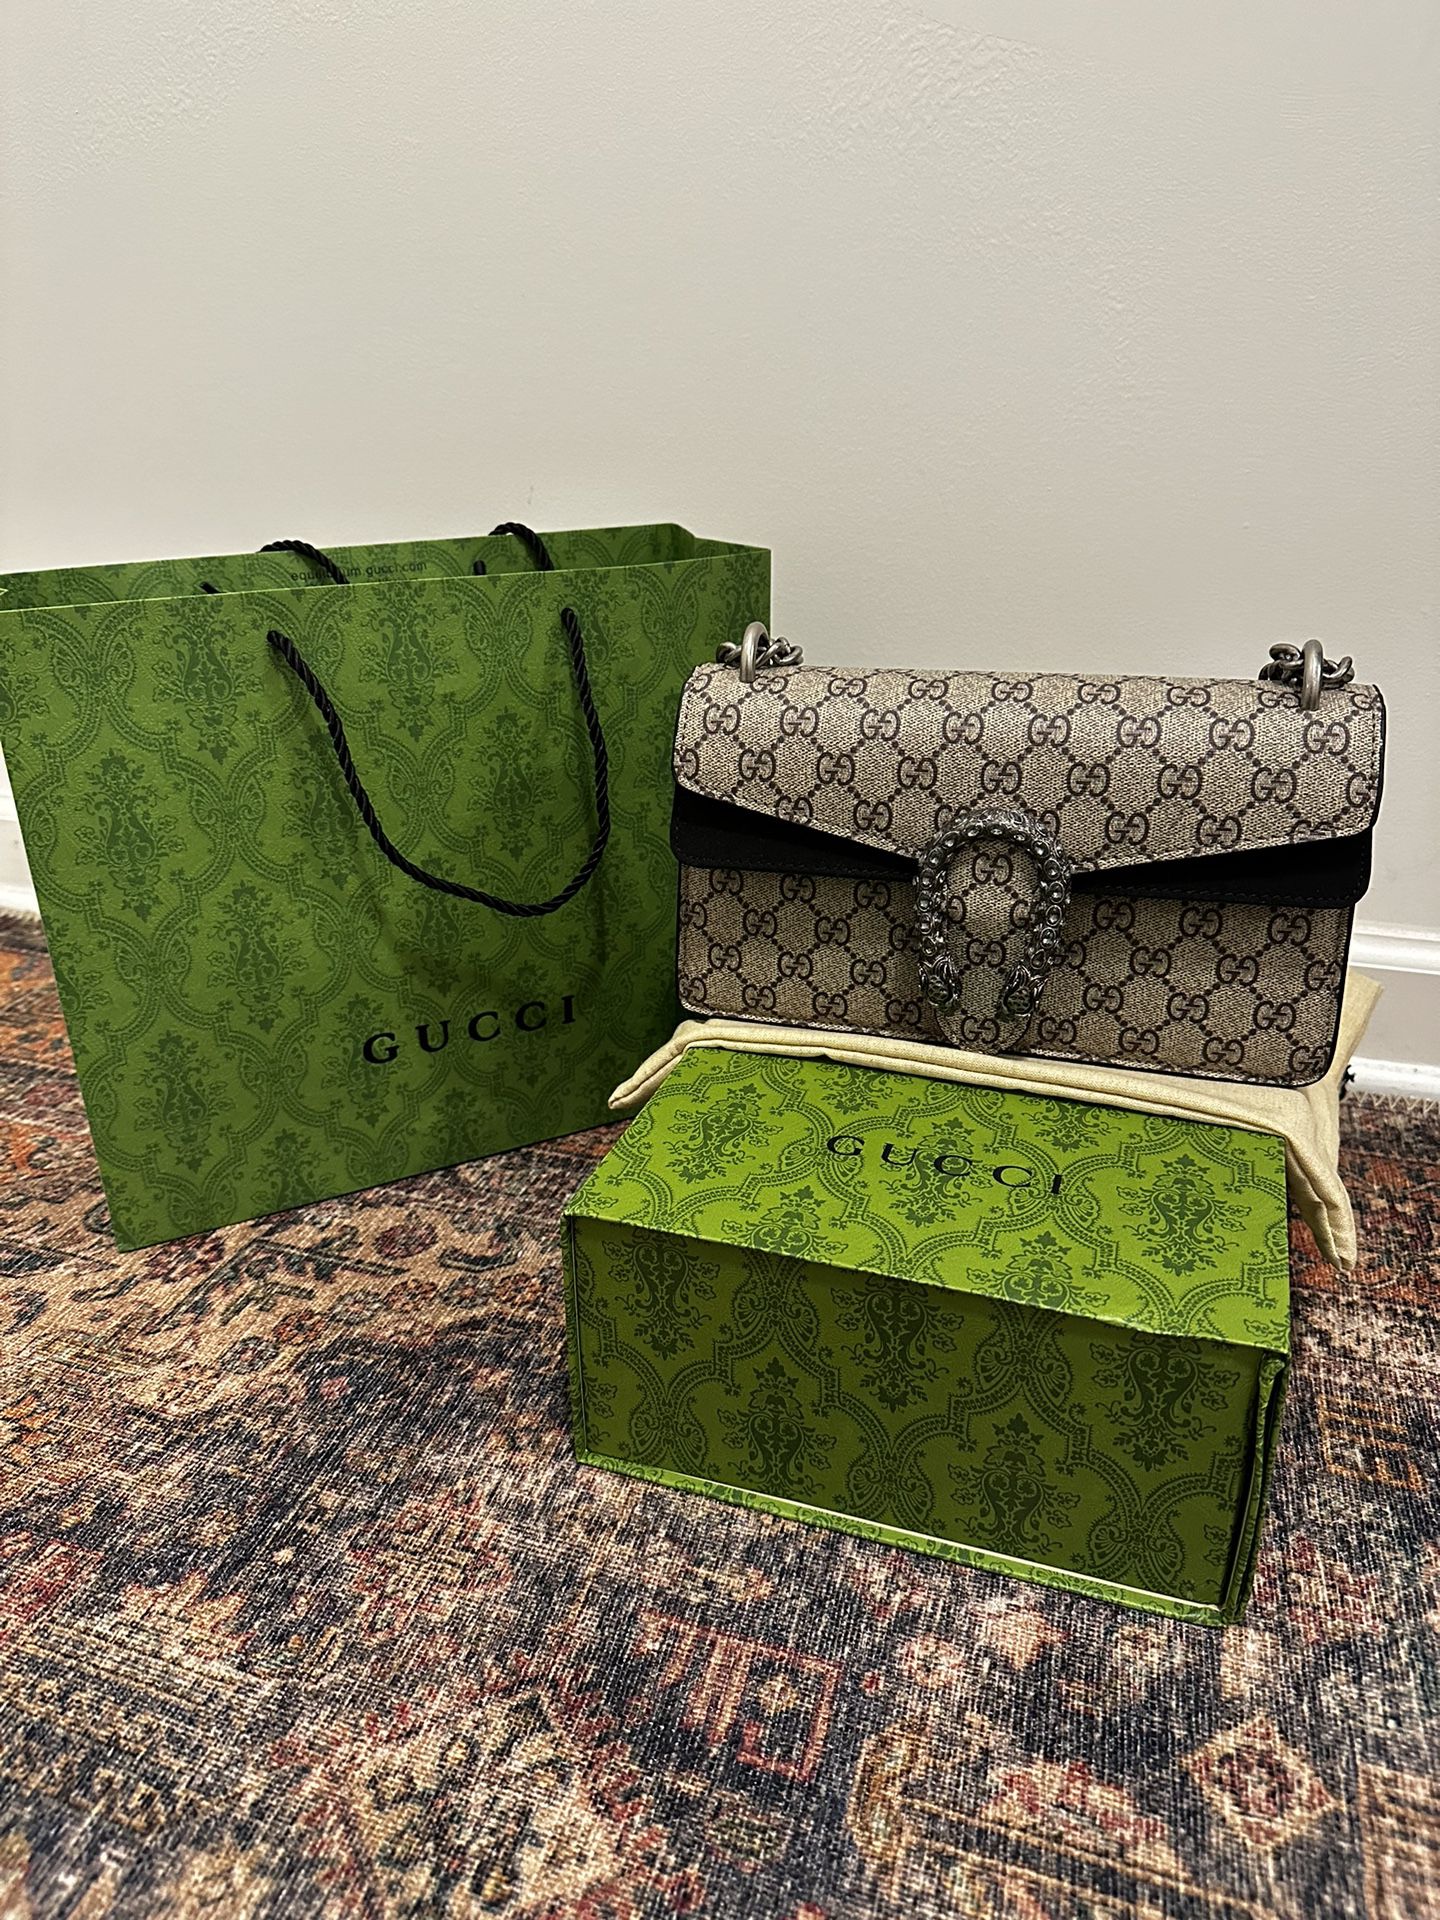 Dionysus Bag for Sale in Stone Mountain, - OfferUp